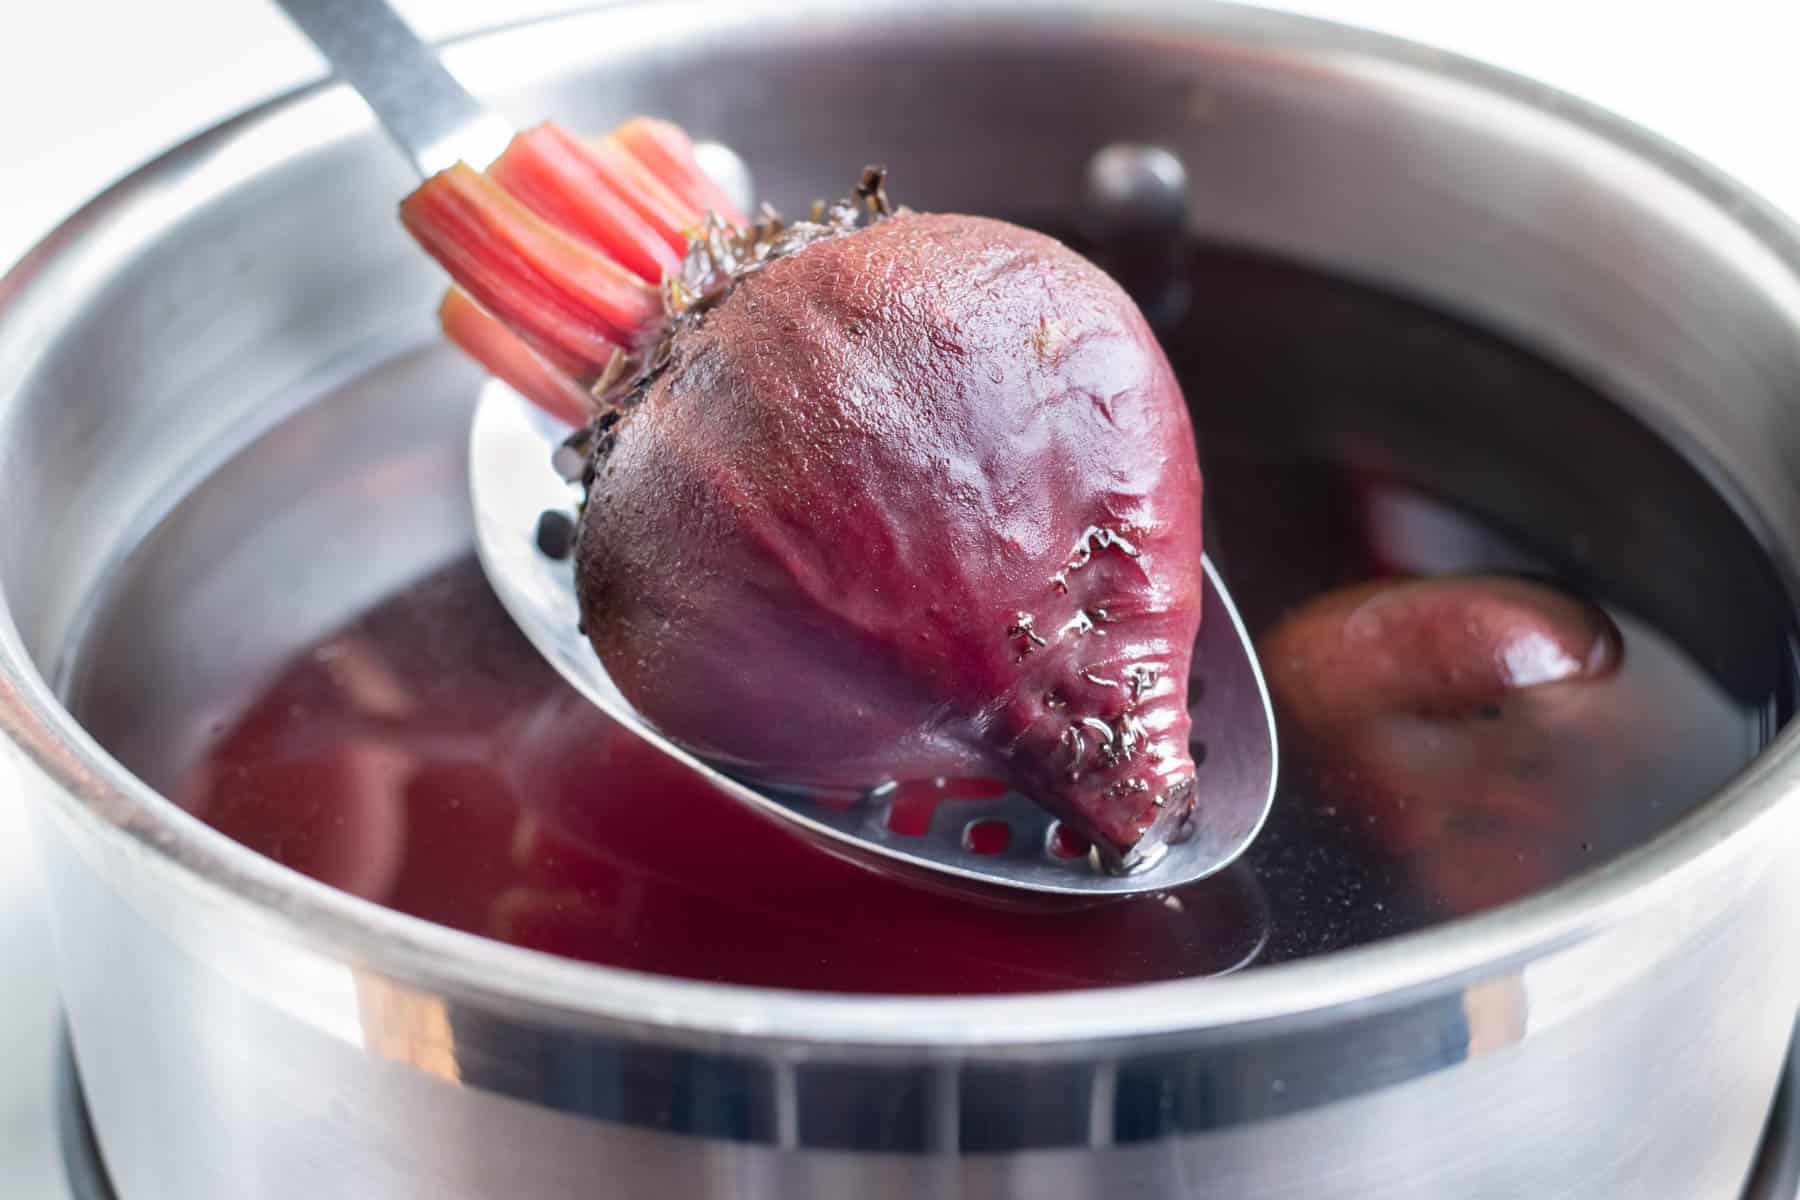 A metal spoon lifts the boiled beet from the pot.